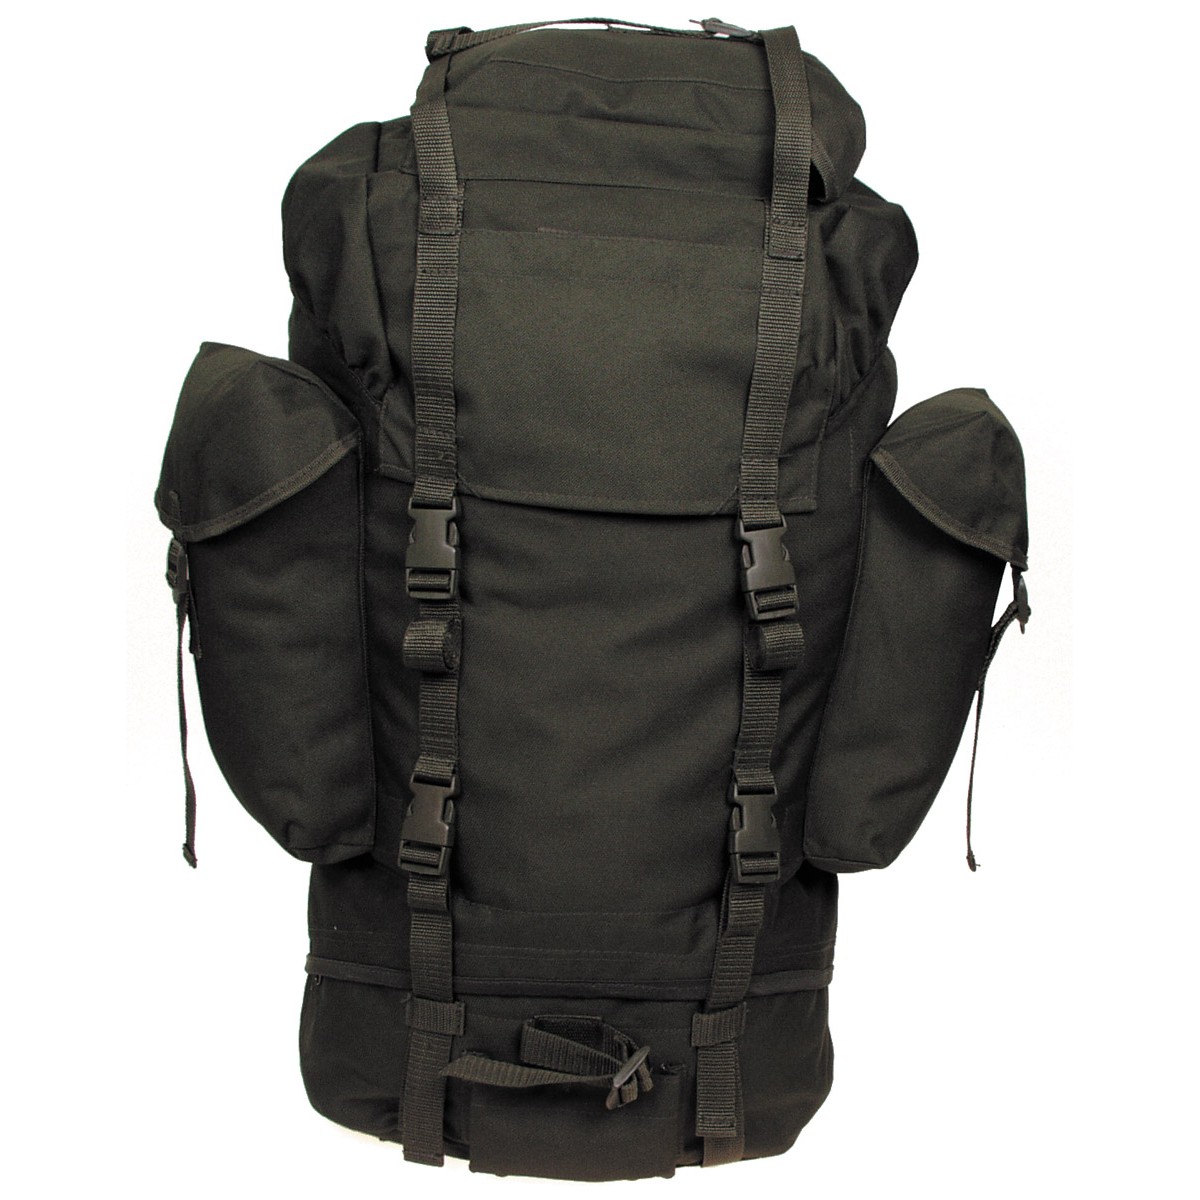 Military Patrol Expedition Backpack Large 65L - OD Green